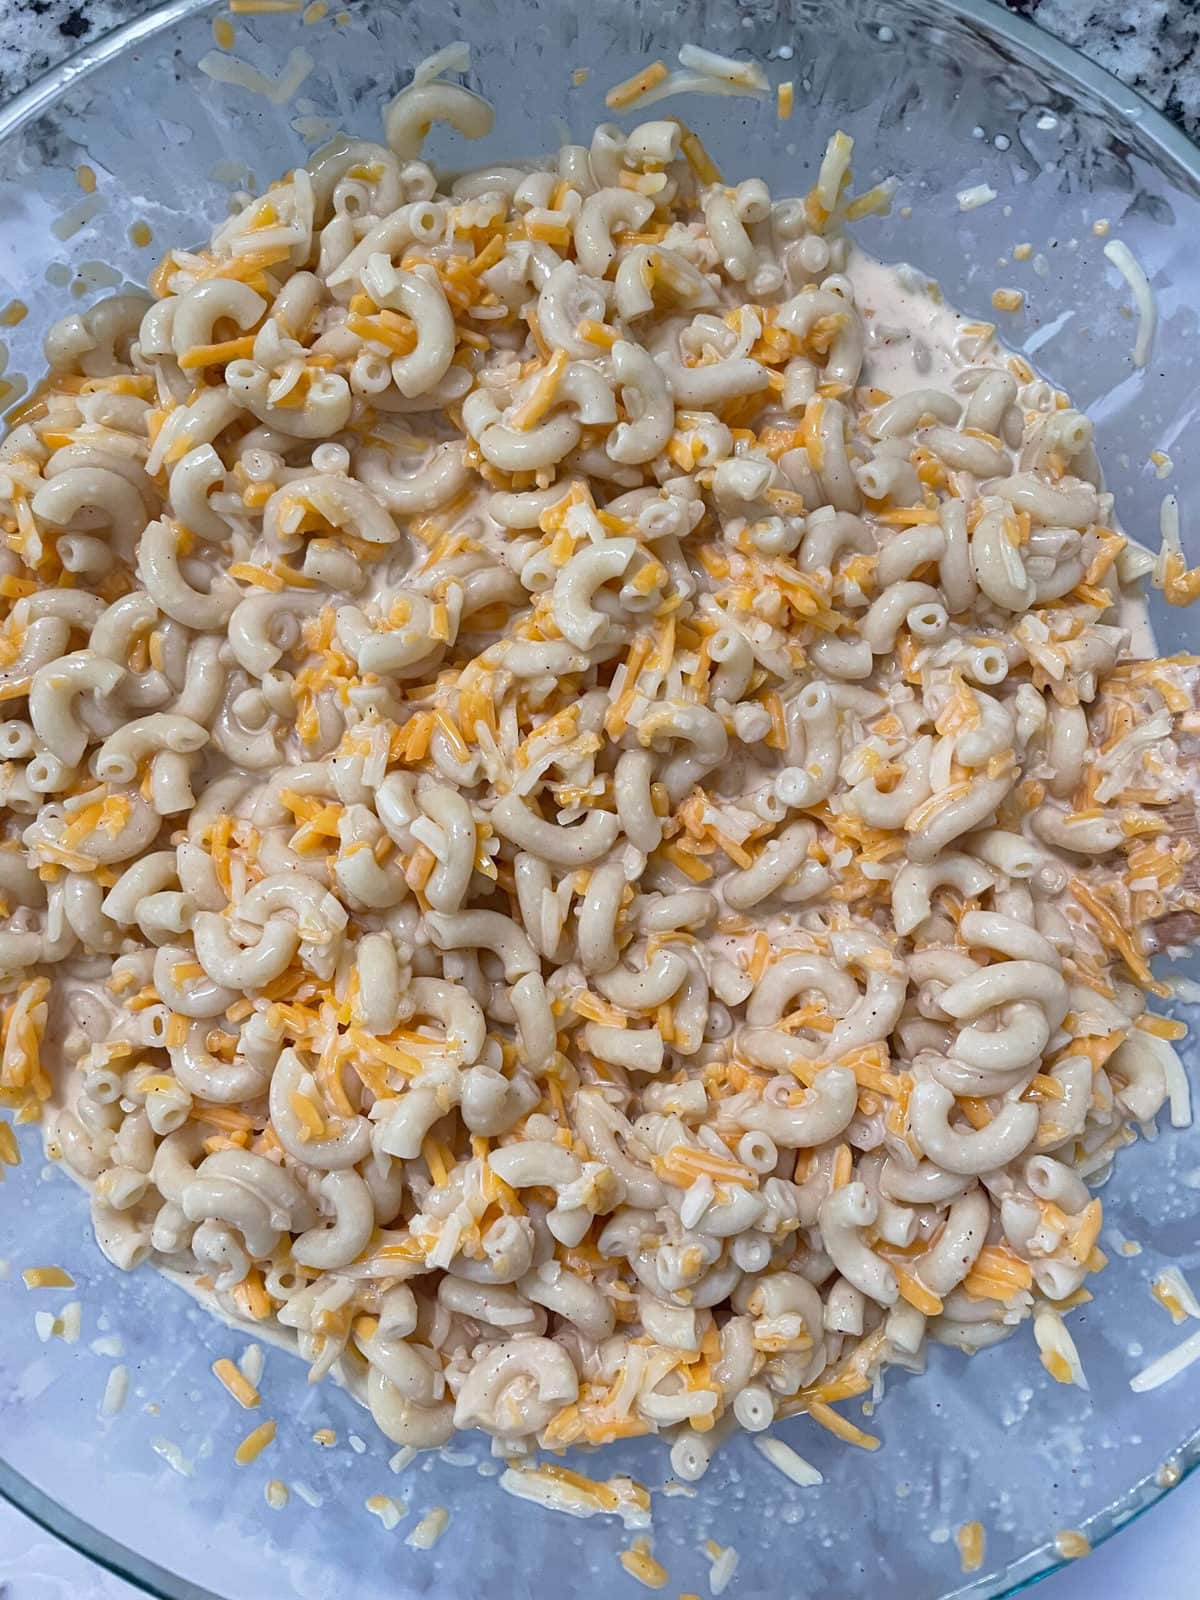 milk, cheese, and macaroni mixture in a glass bowl